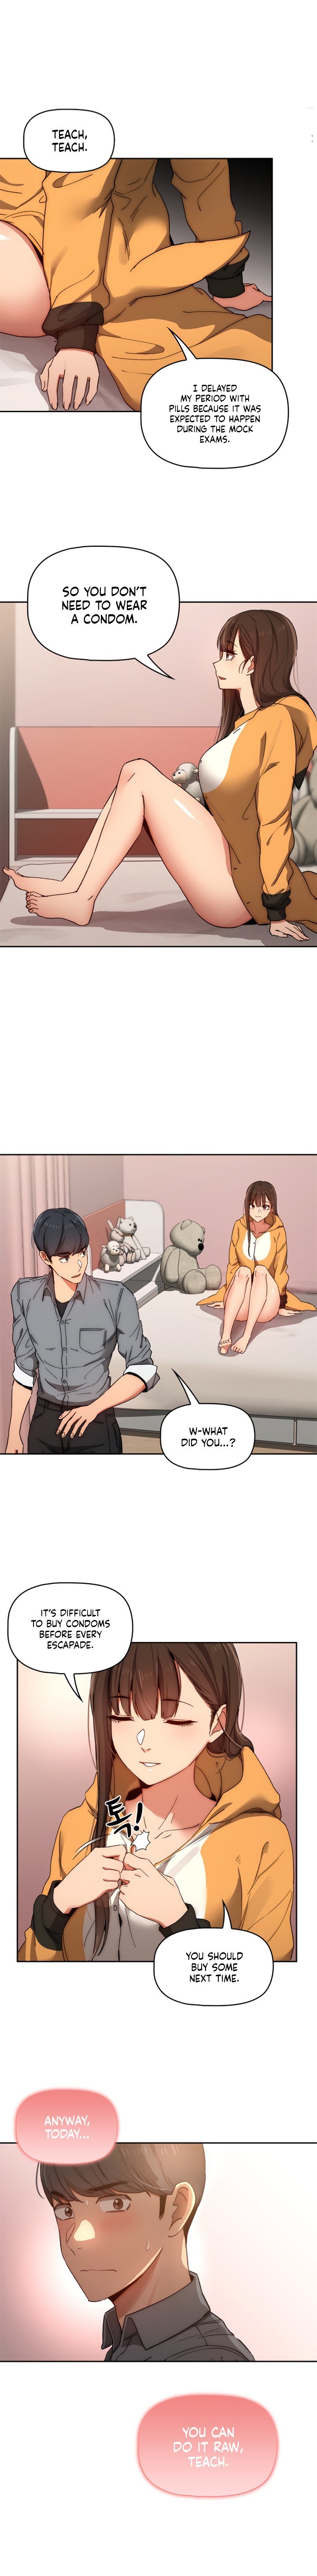 private-tutoring-in-these-trying-times-chap-30-1